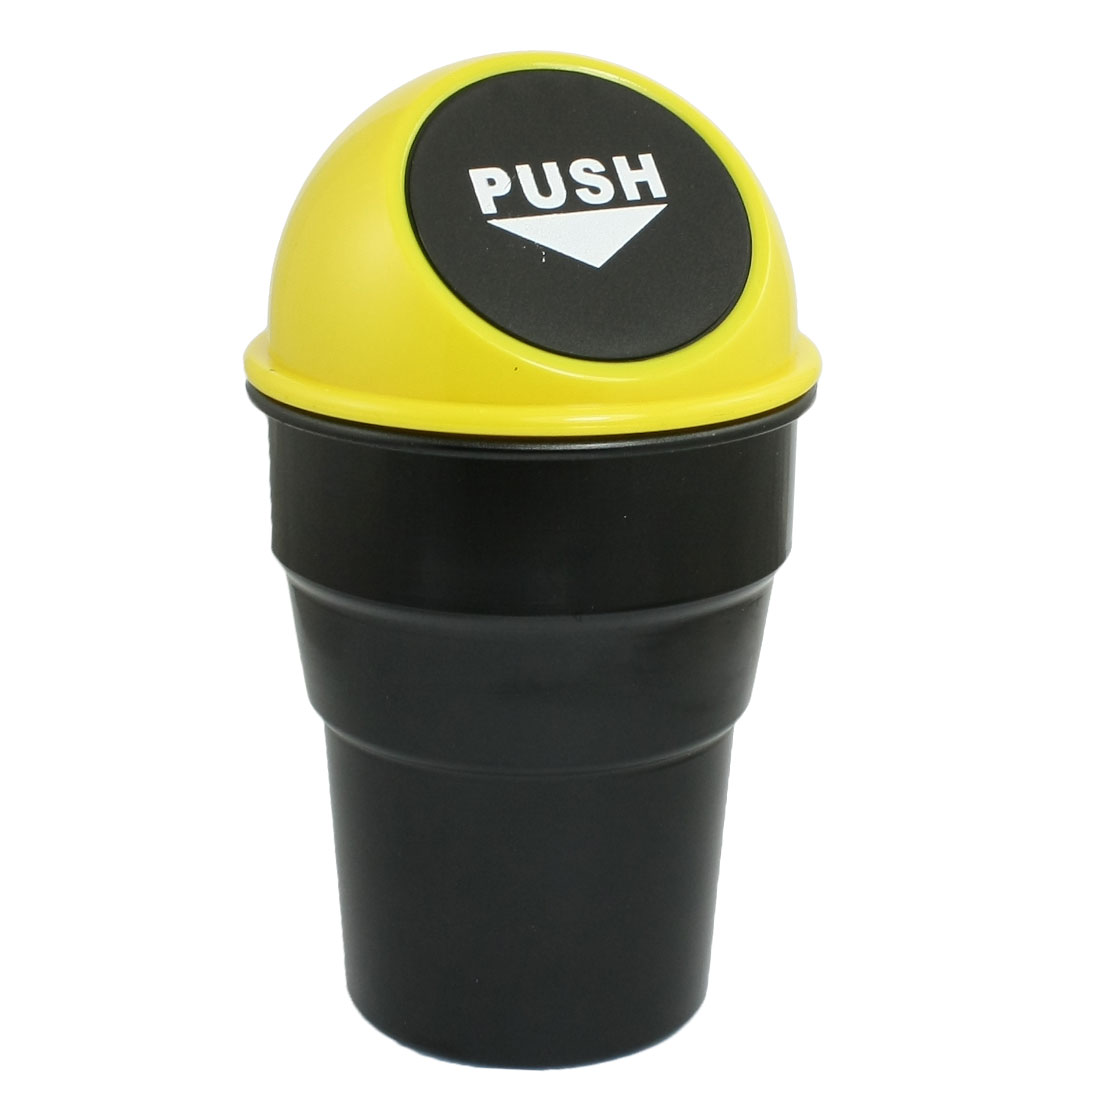 Unique Bargains Office Home Vehicle Car Garbage Rubbish Trash Bin Can Holder Yellow